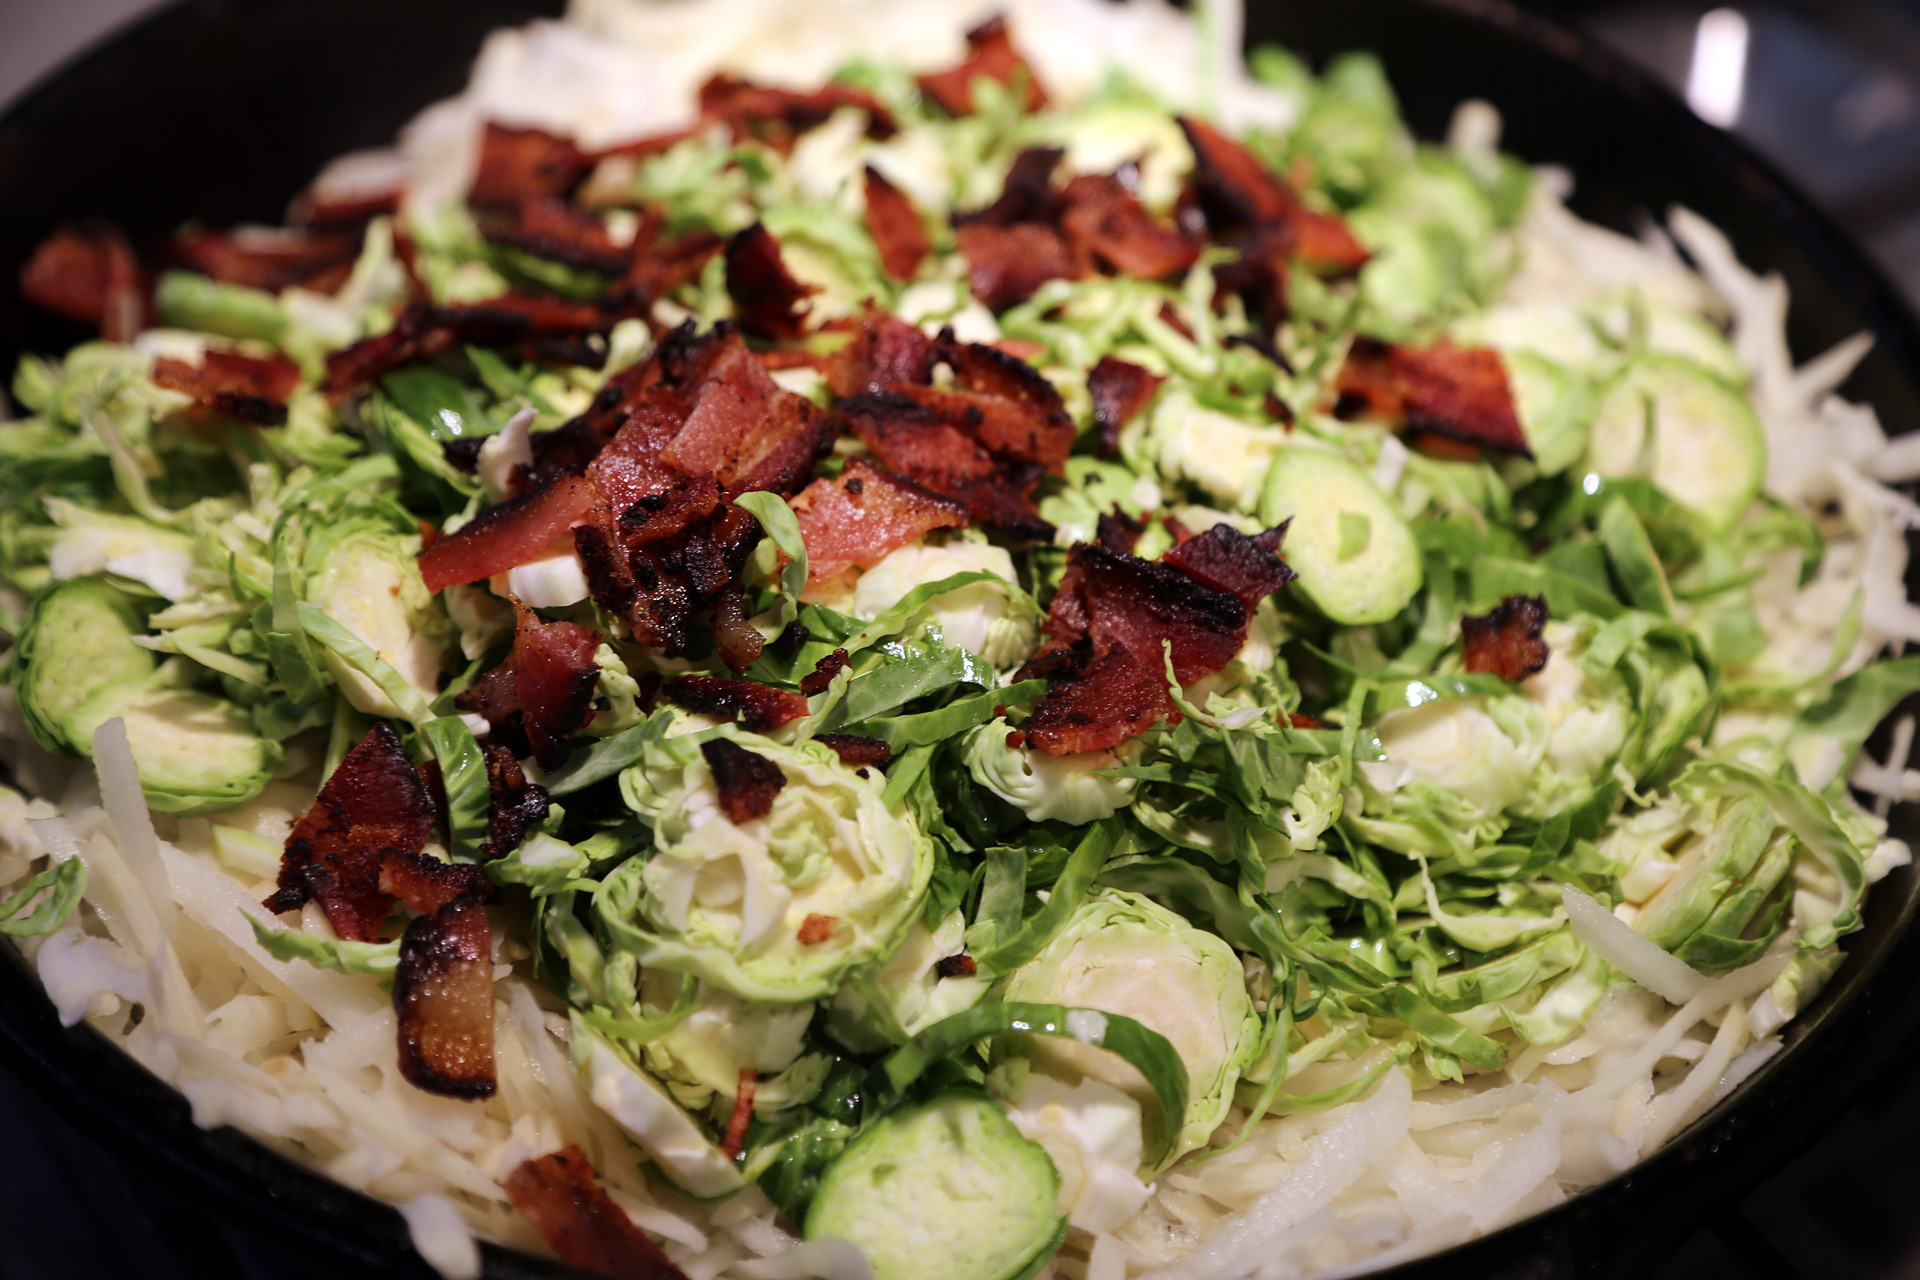 Add potatoes, Brussels sprouts, and crumbled bacon, in that order.